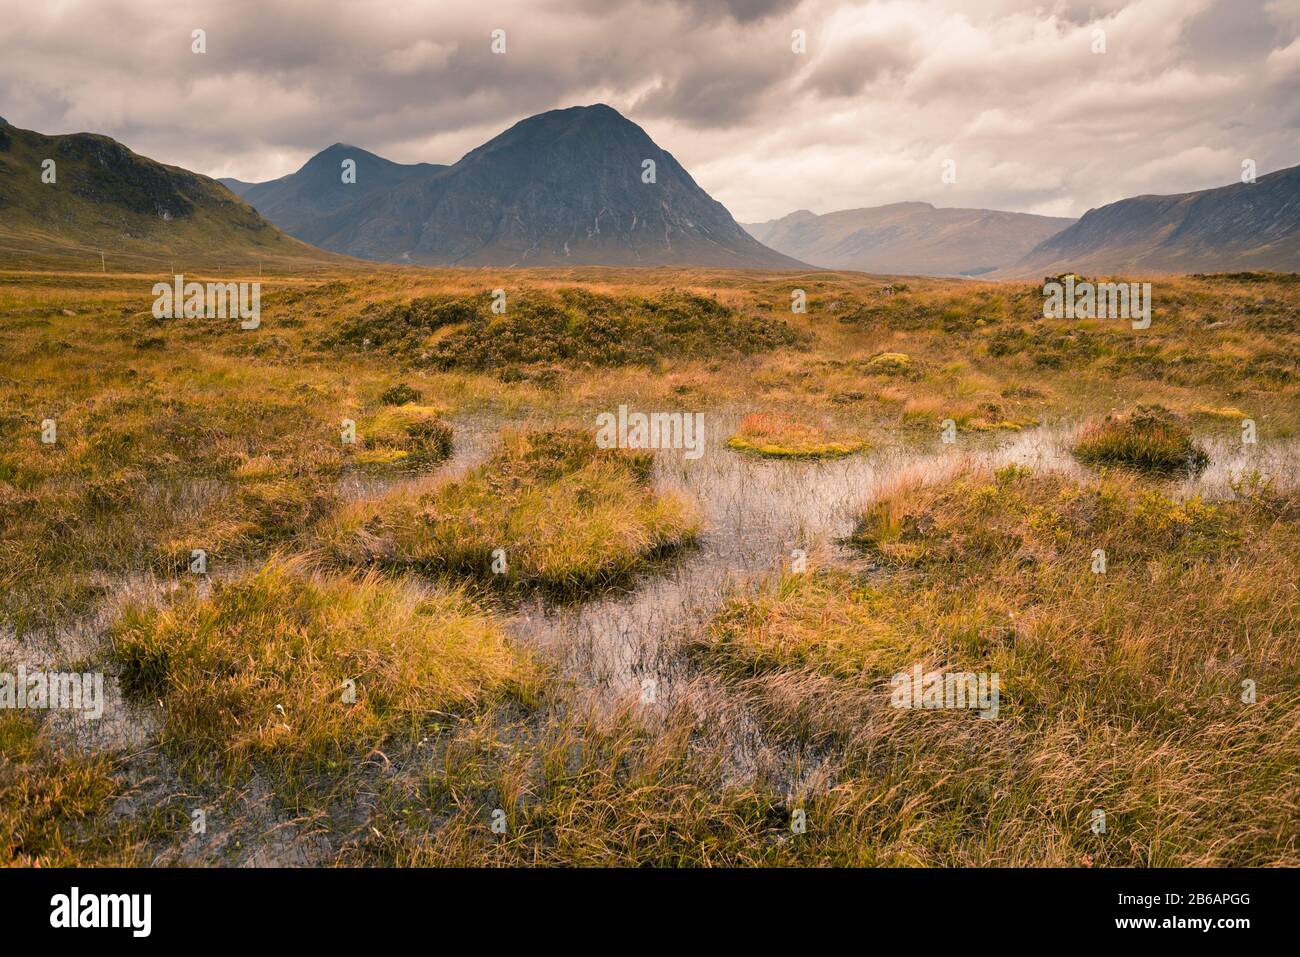 The blue silhouette of Buachaille Etive Mor in the distance under a stormy sky, with marsh waters and grass in the foreground. Glencoe, Scottish Highl Stock Photo